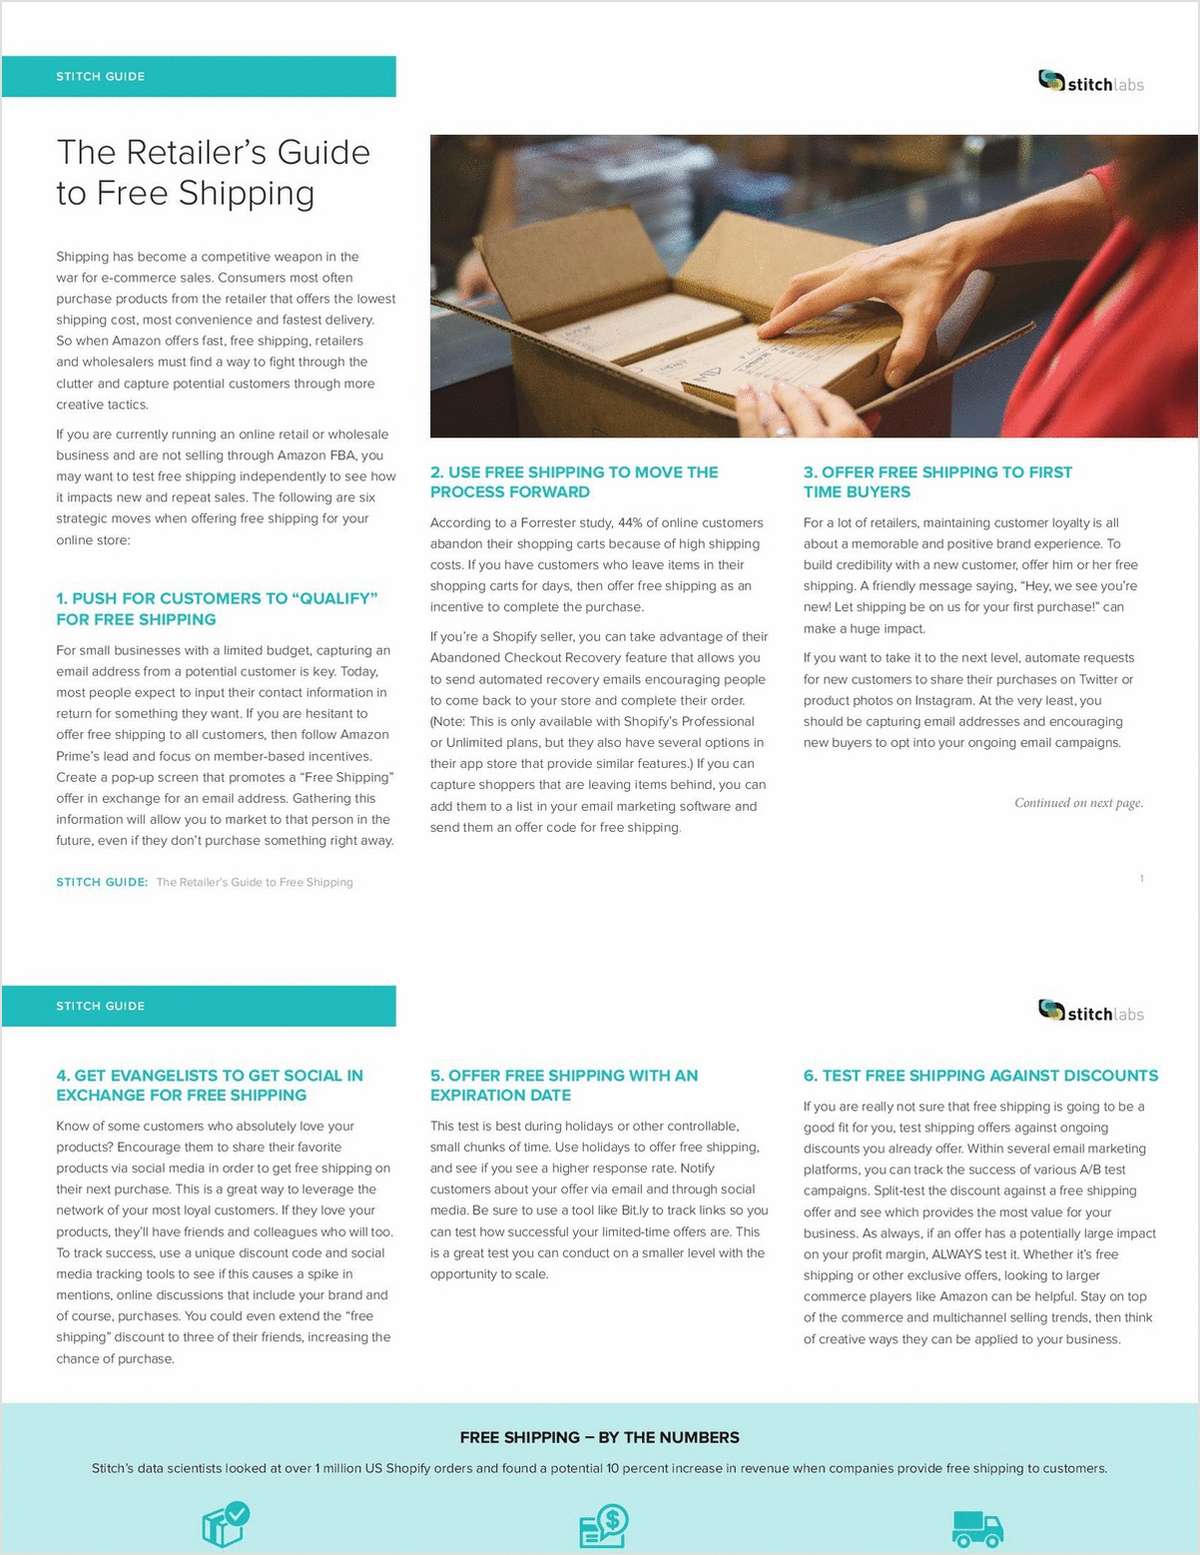 The Retailer's Guide to Free Shipping